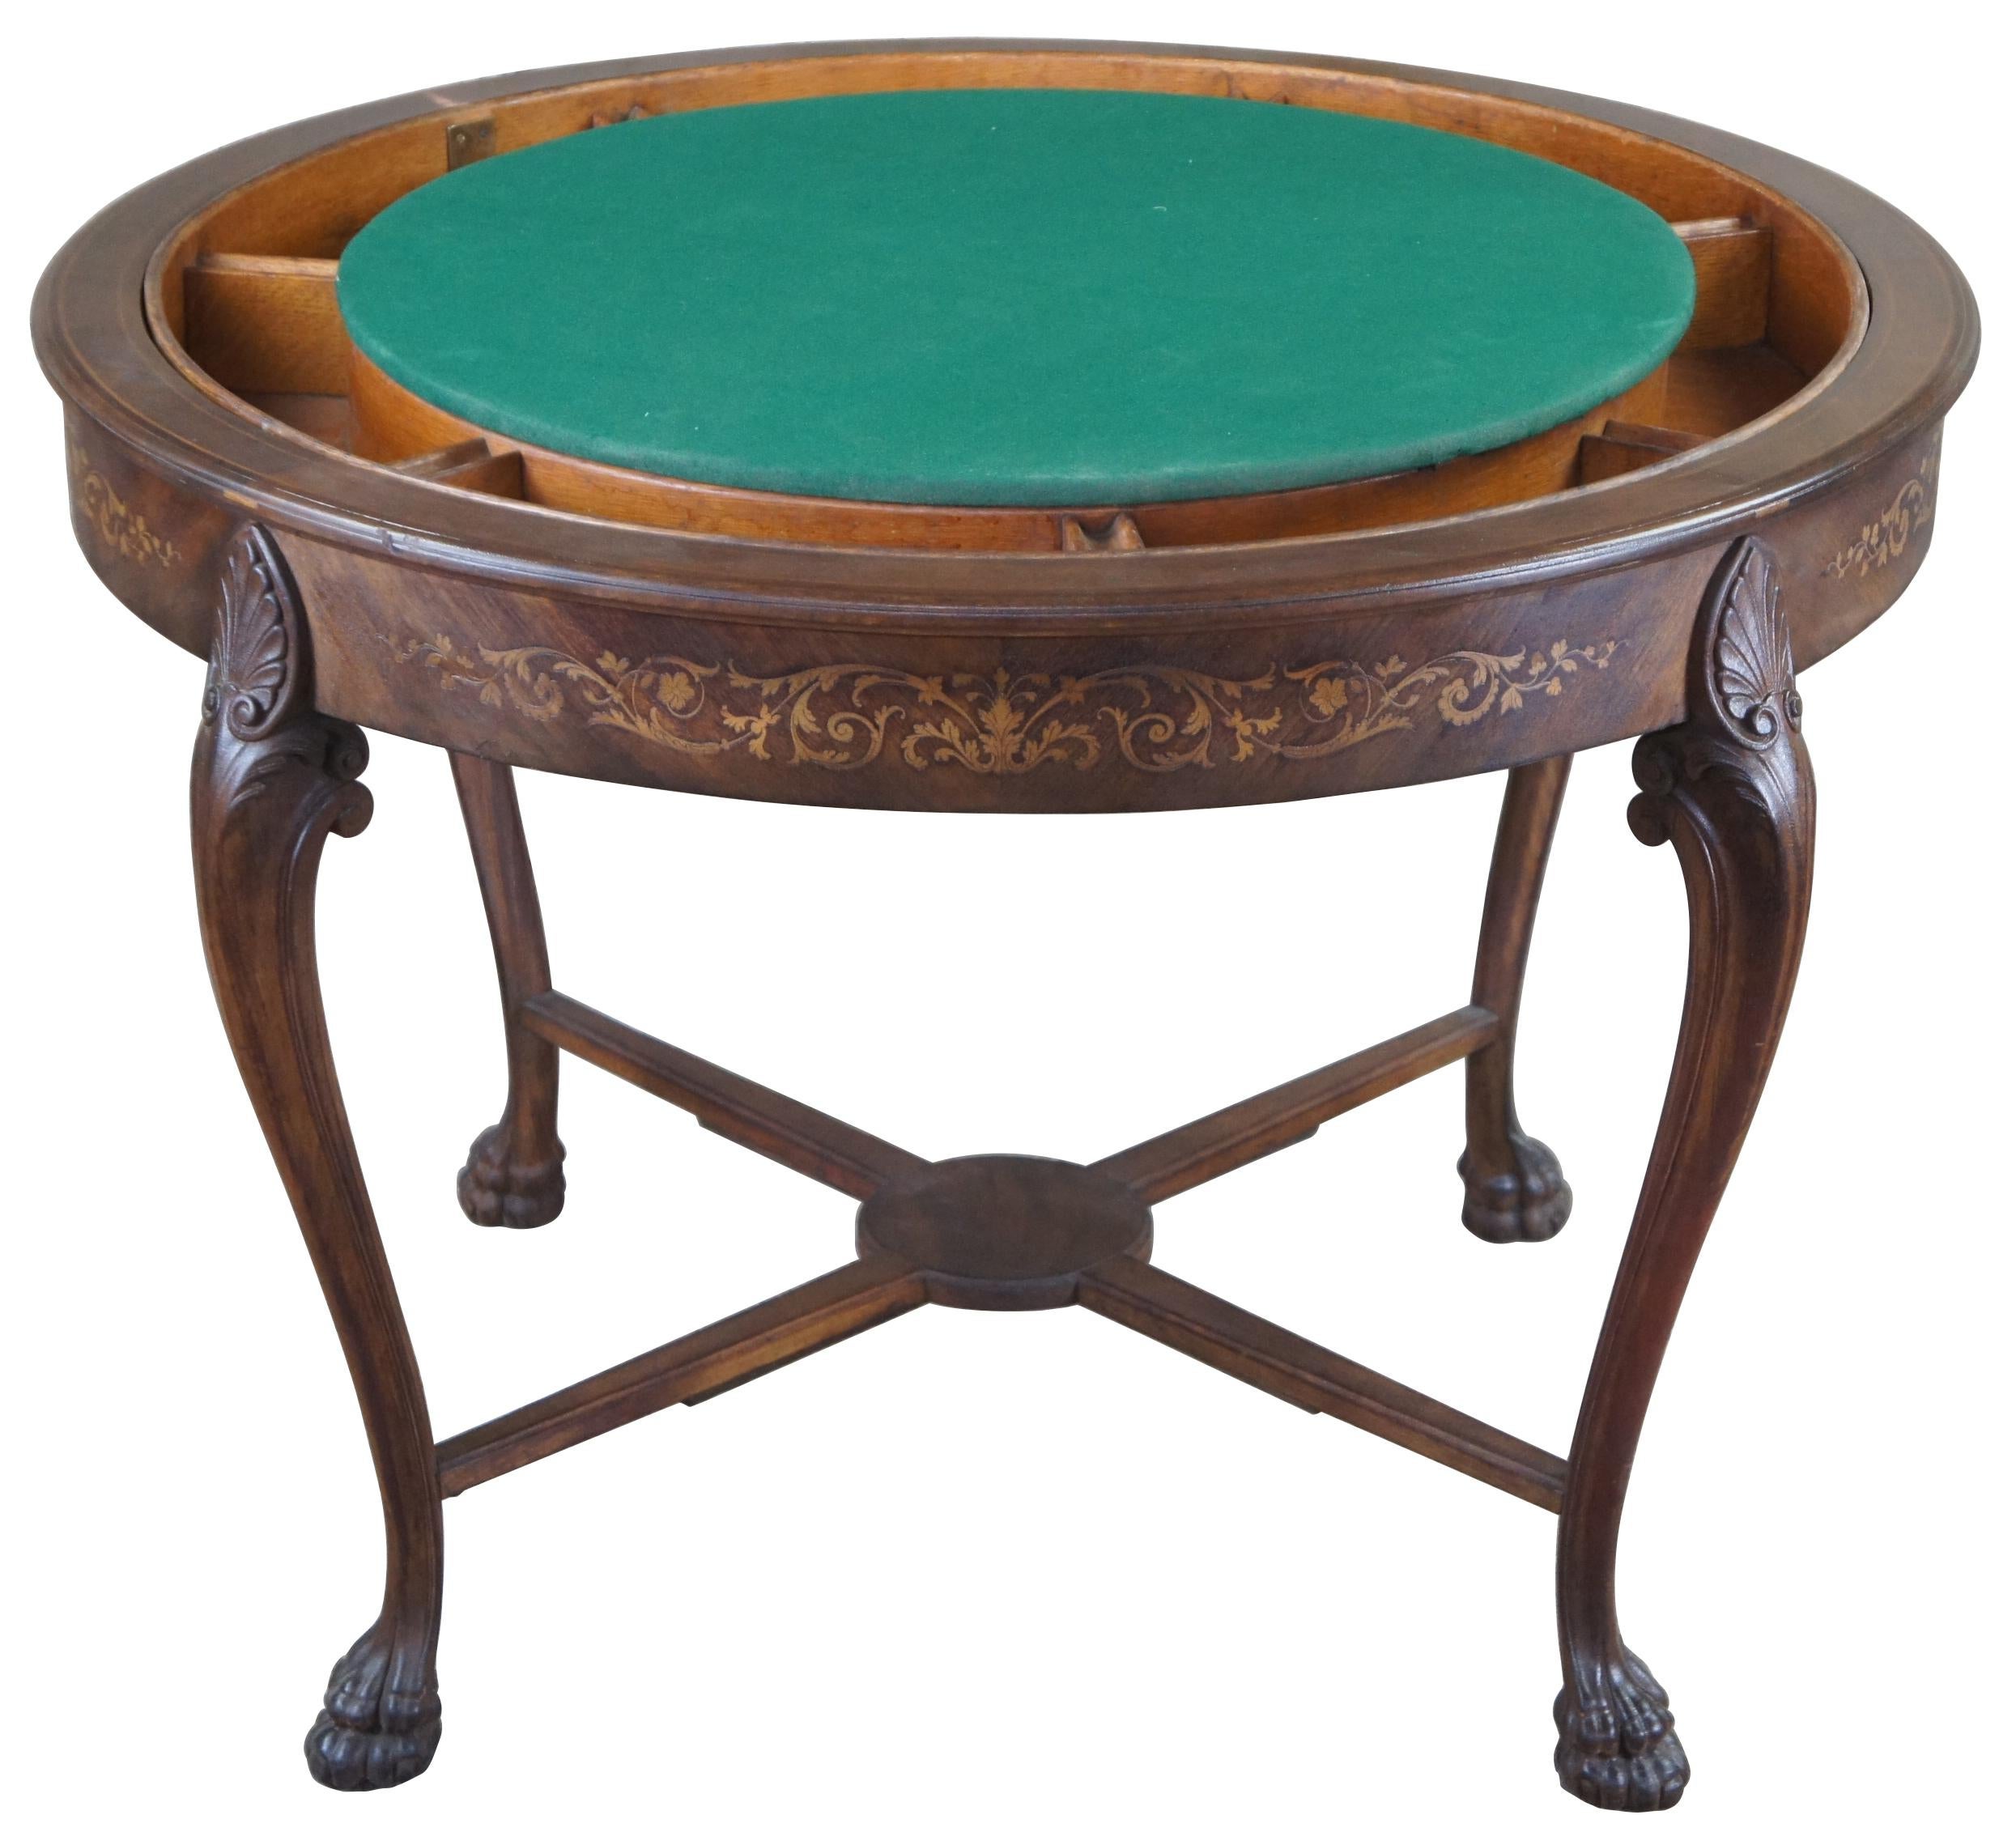 Rare antique Victorian flip top poker or game table. Finely carved and scalloped walnut featuring marquetry inlay design, serpentine cabriole legs and paw feet. Convertible center is released via a hidden brass latch and opens to a stunning baize